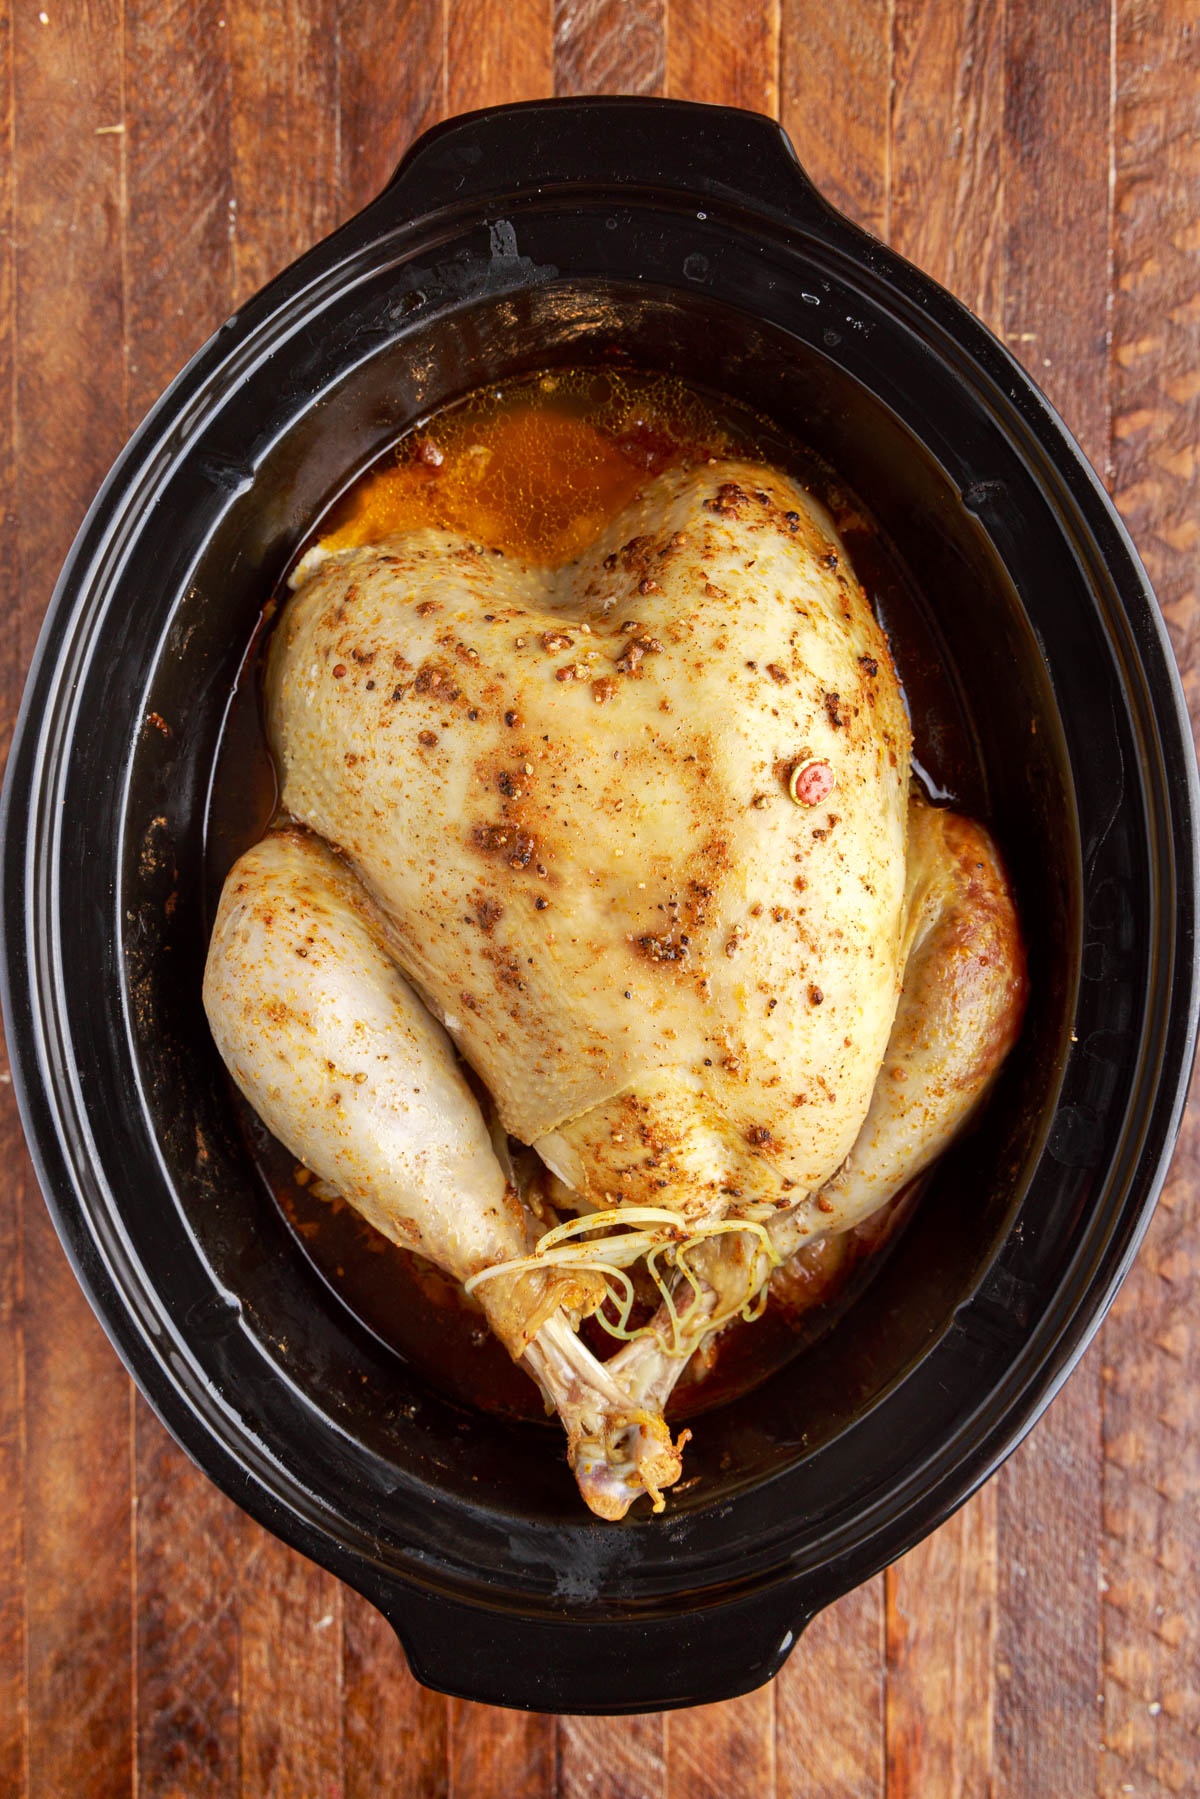 cooked turkey in a slow cooker before broiling